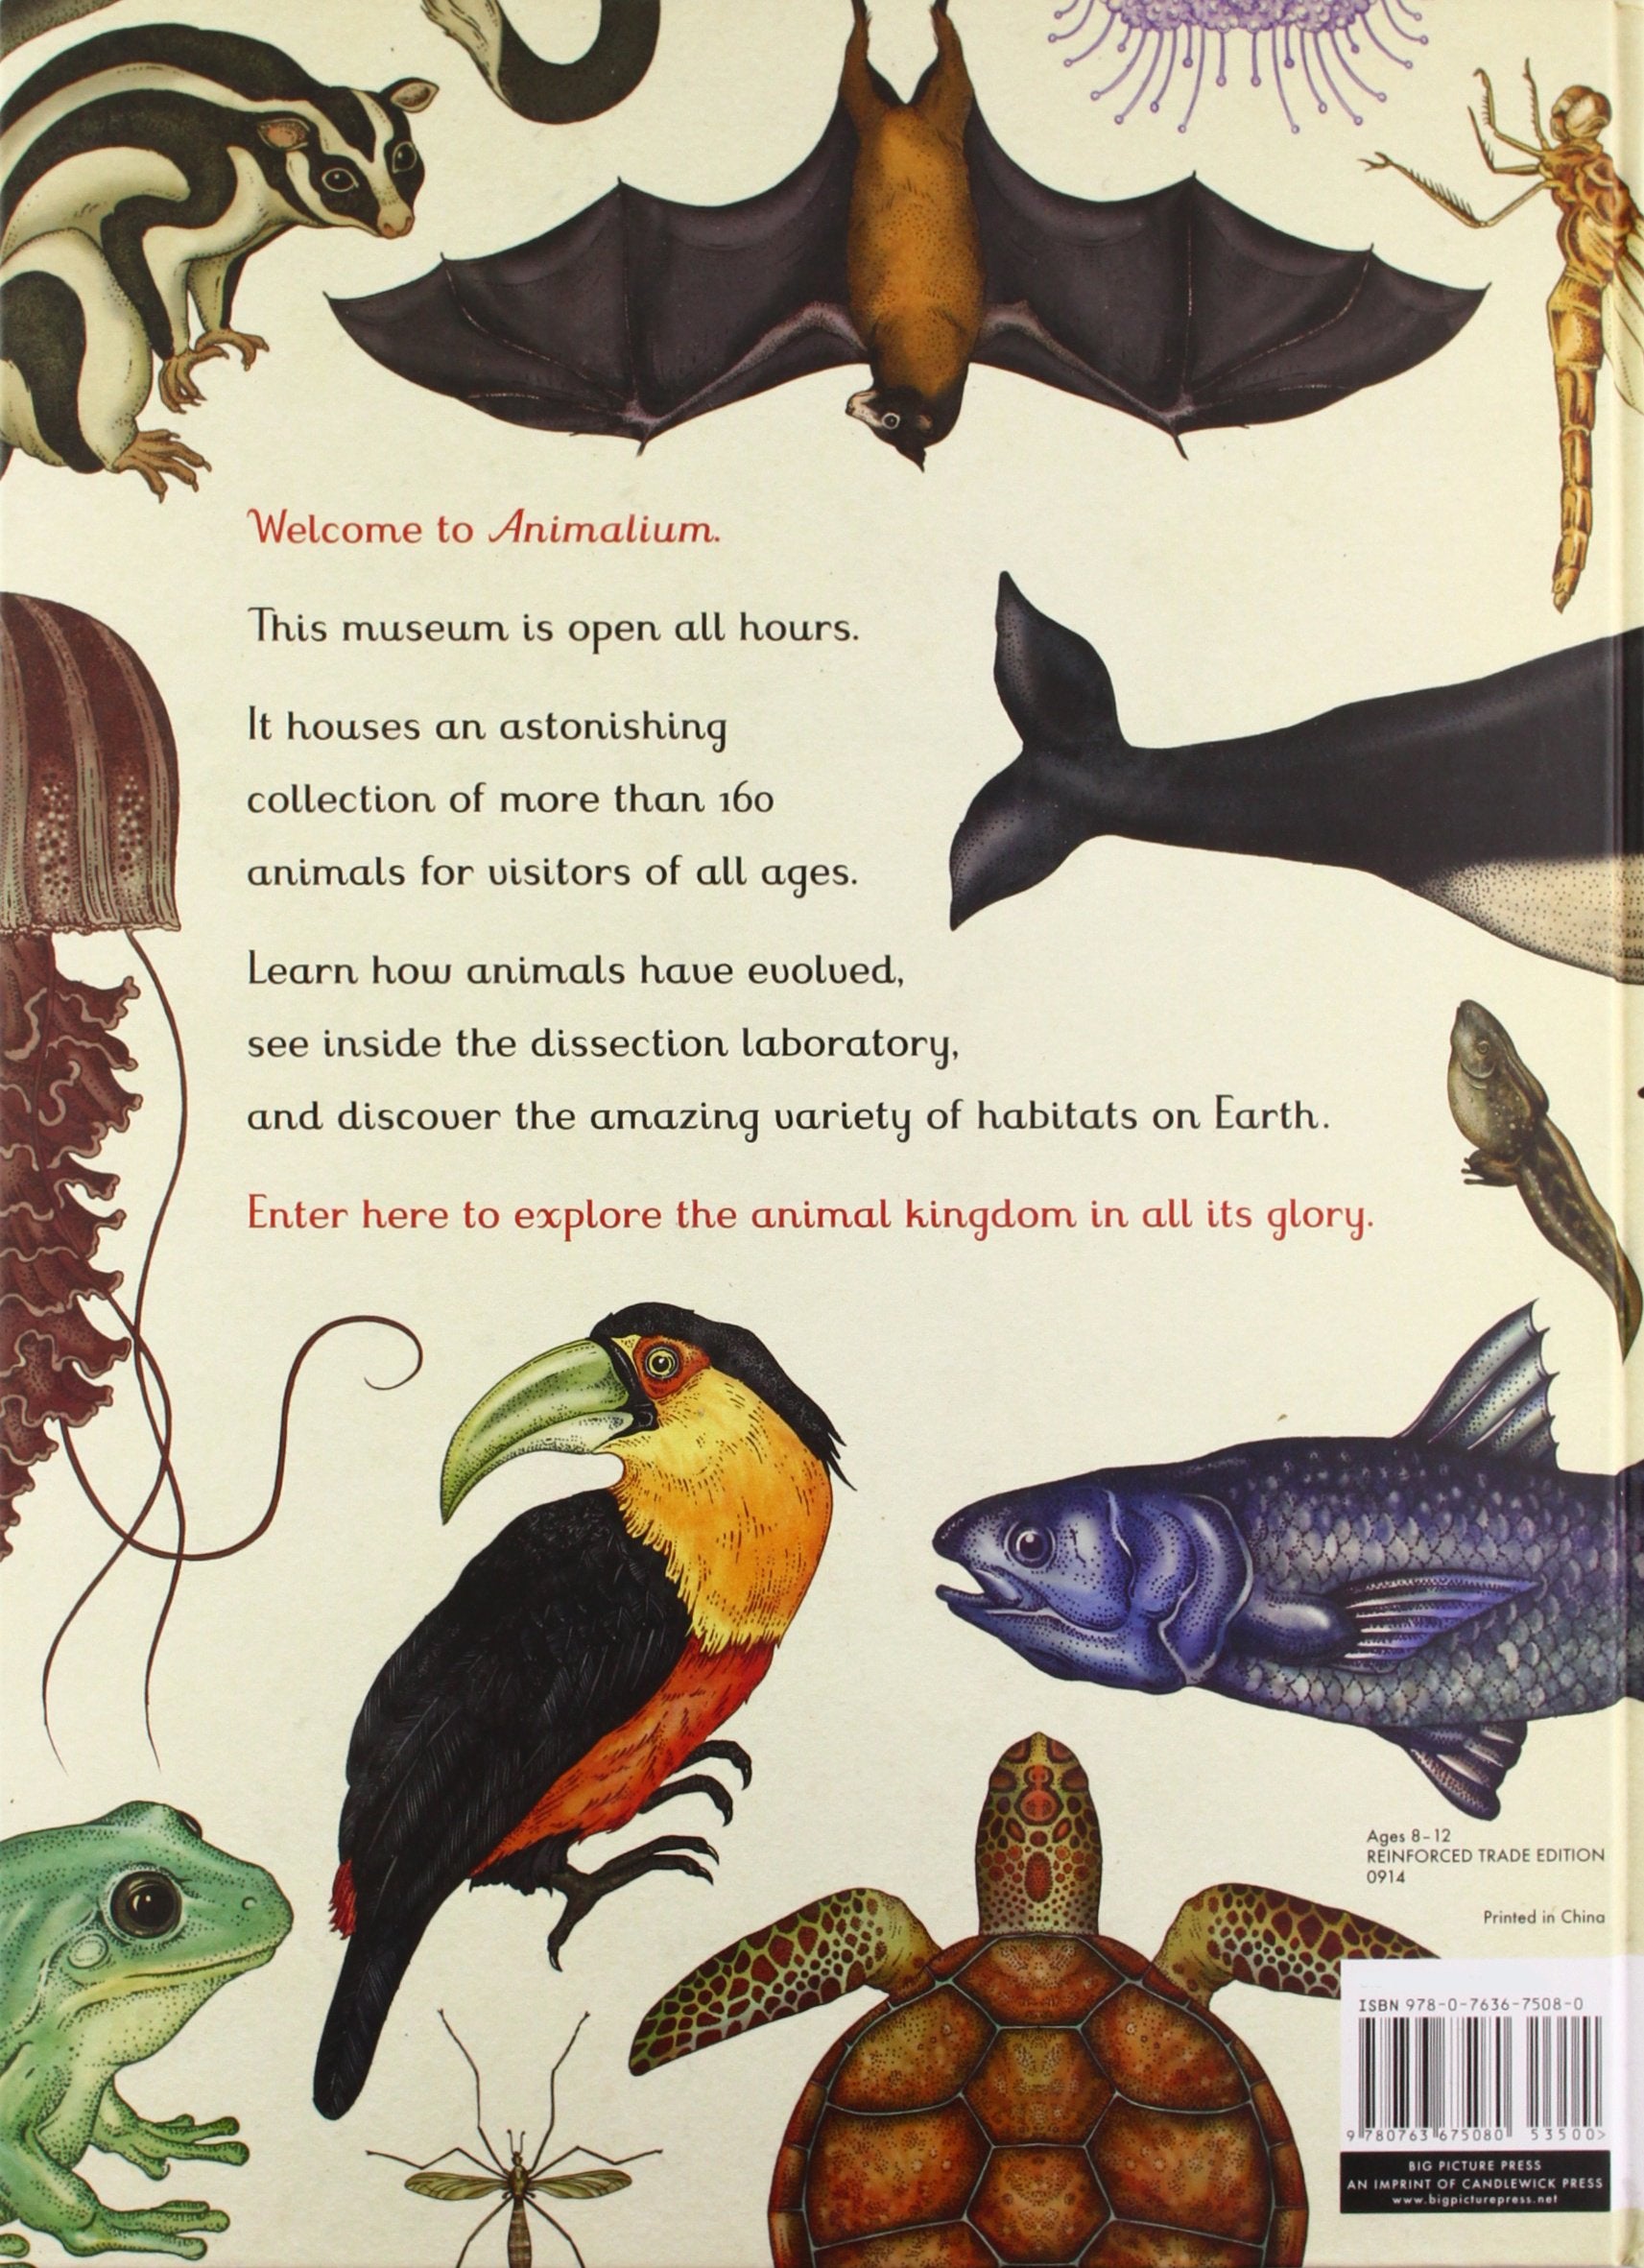 Welcome to the Museum Book Collection | Animalium {multiple types + bundle discount}